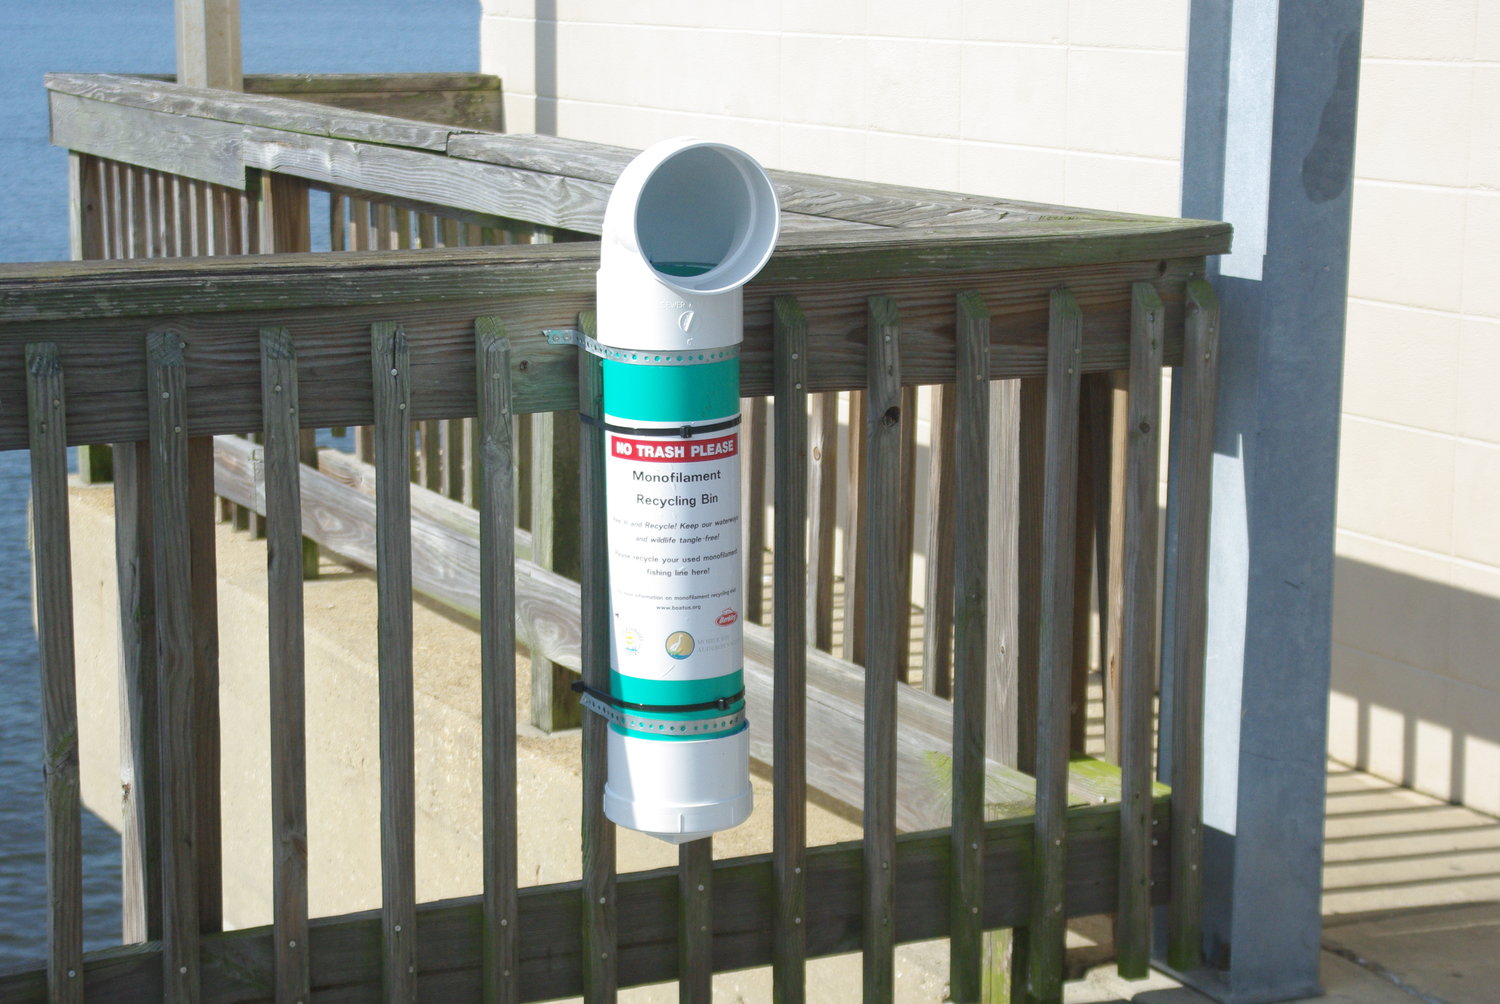 Fishing line recycling containers installed on Fairhope Pier - Gulf Coast  Media